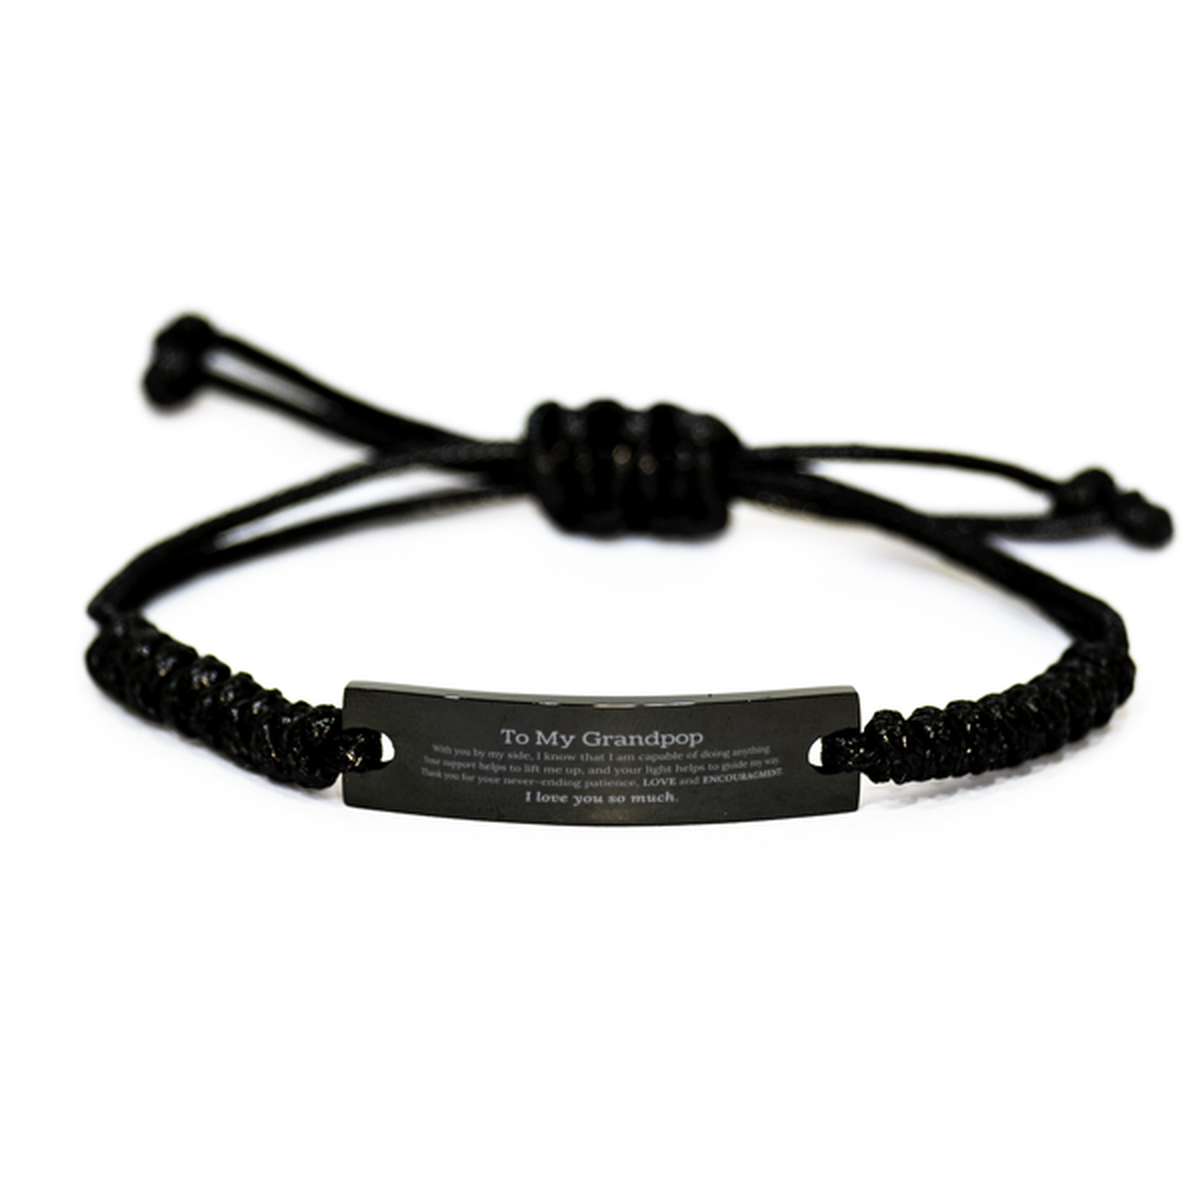 Appreciation Grandpop Black Rope Bracelet Gifts, To My Grandpop Birthday Christmas Wedding Keepsake Gifts for Grandpop With you by my side, I know that I am capable of doing anything. I love you so much